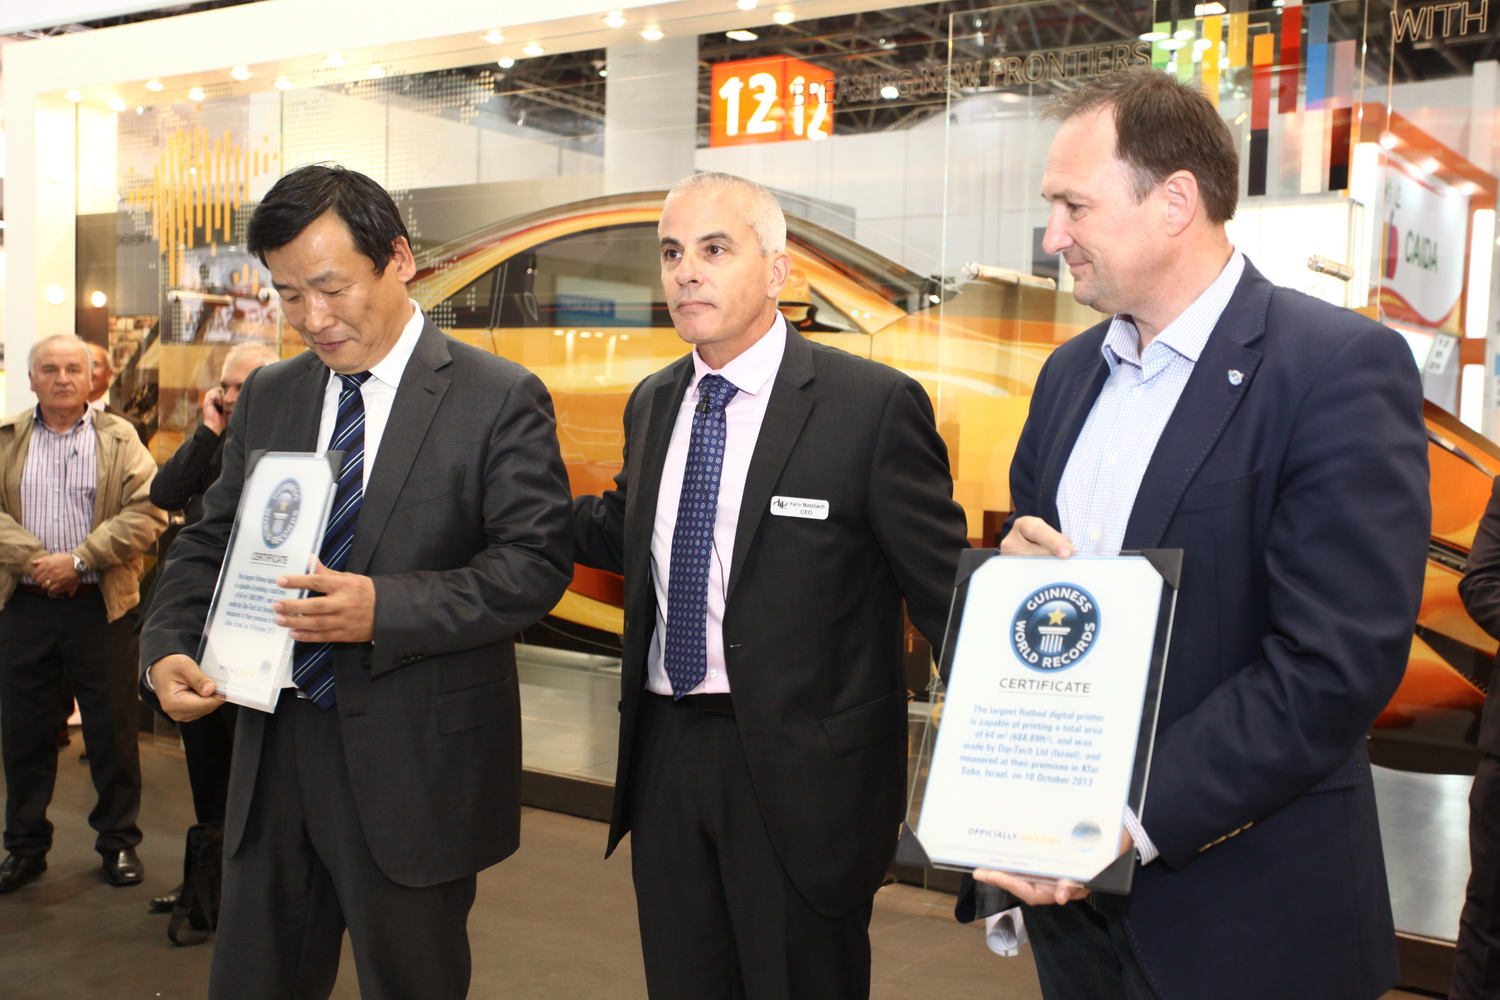 Dip-Tech CEO present Guinness Certificates on Printed Glass to TNG and sedak